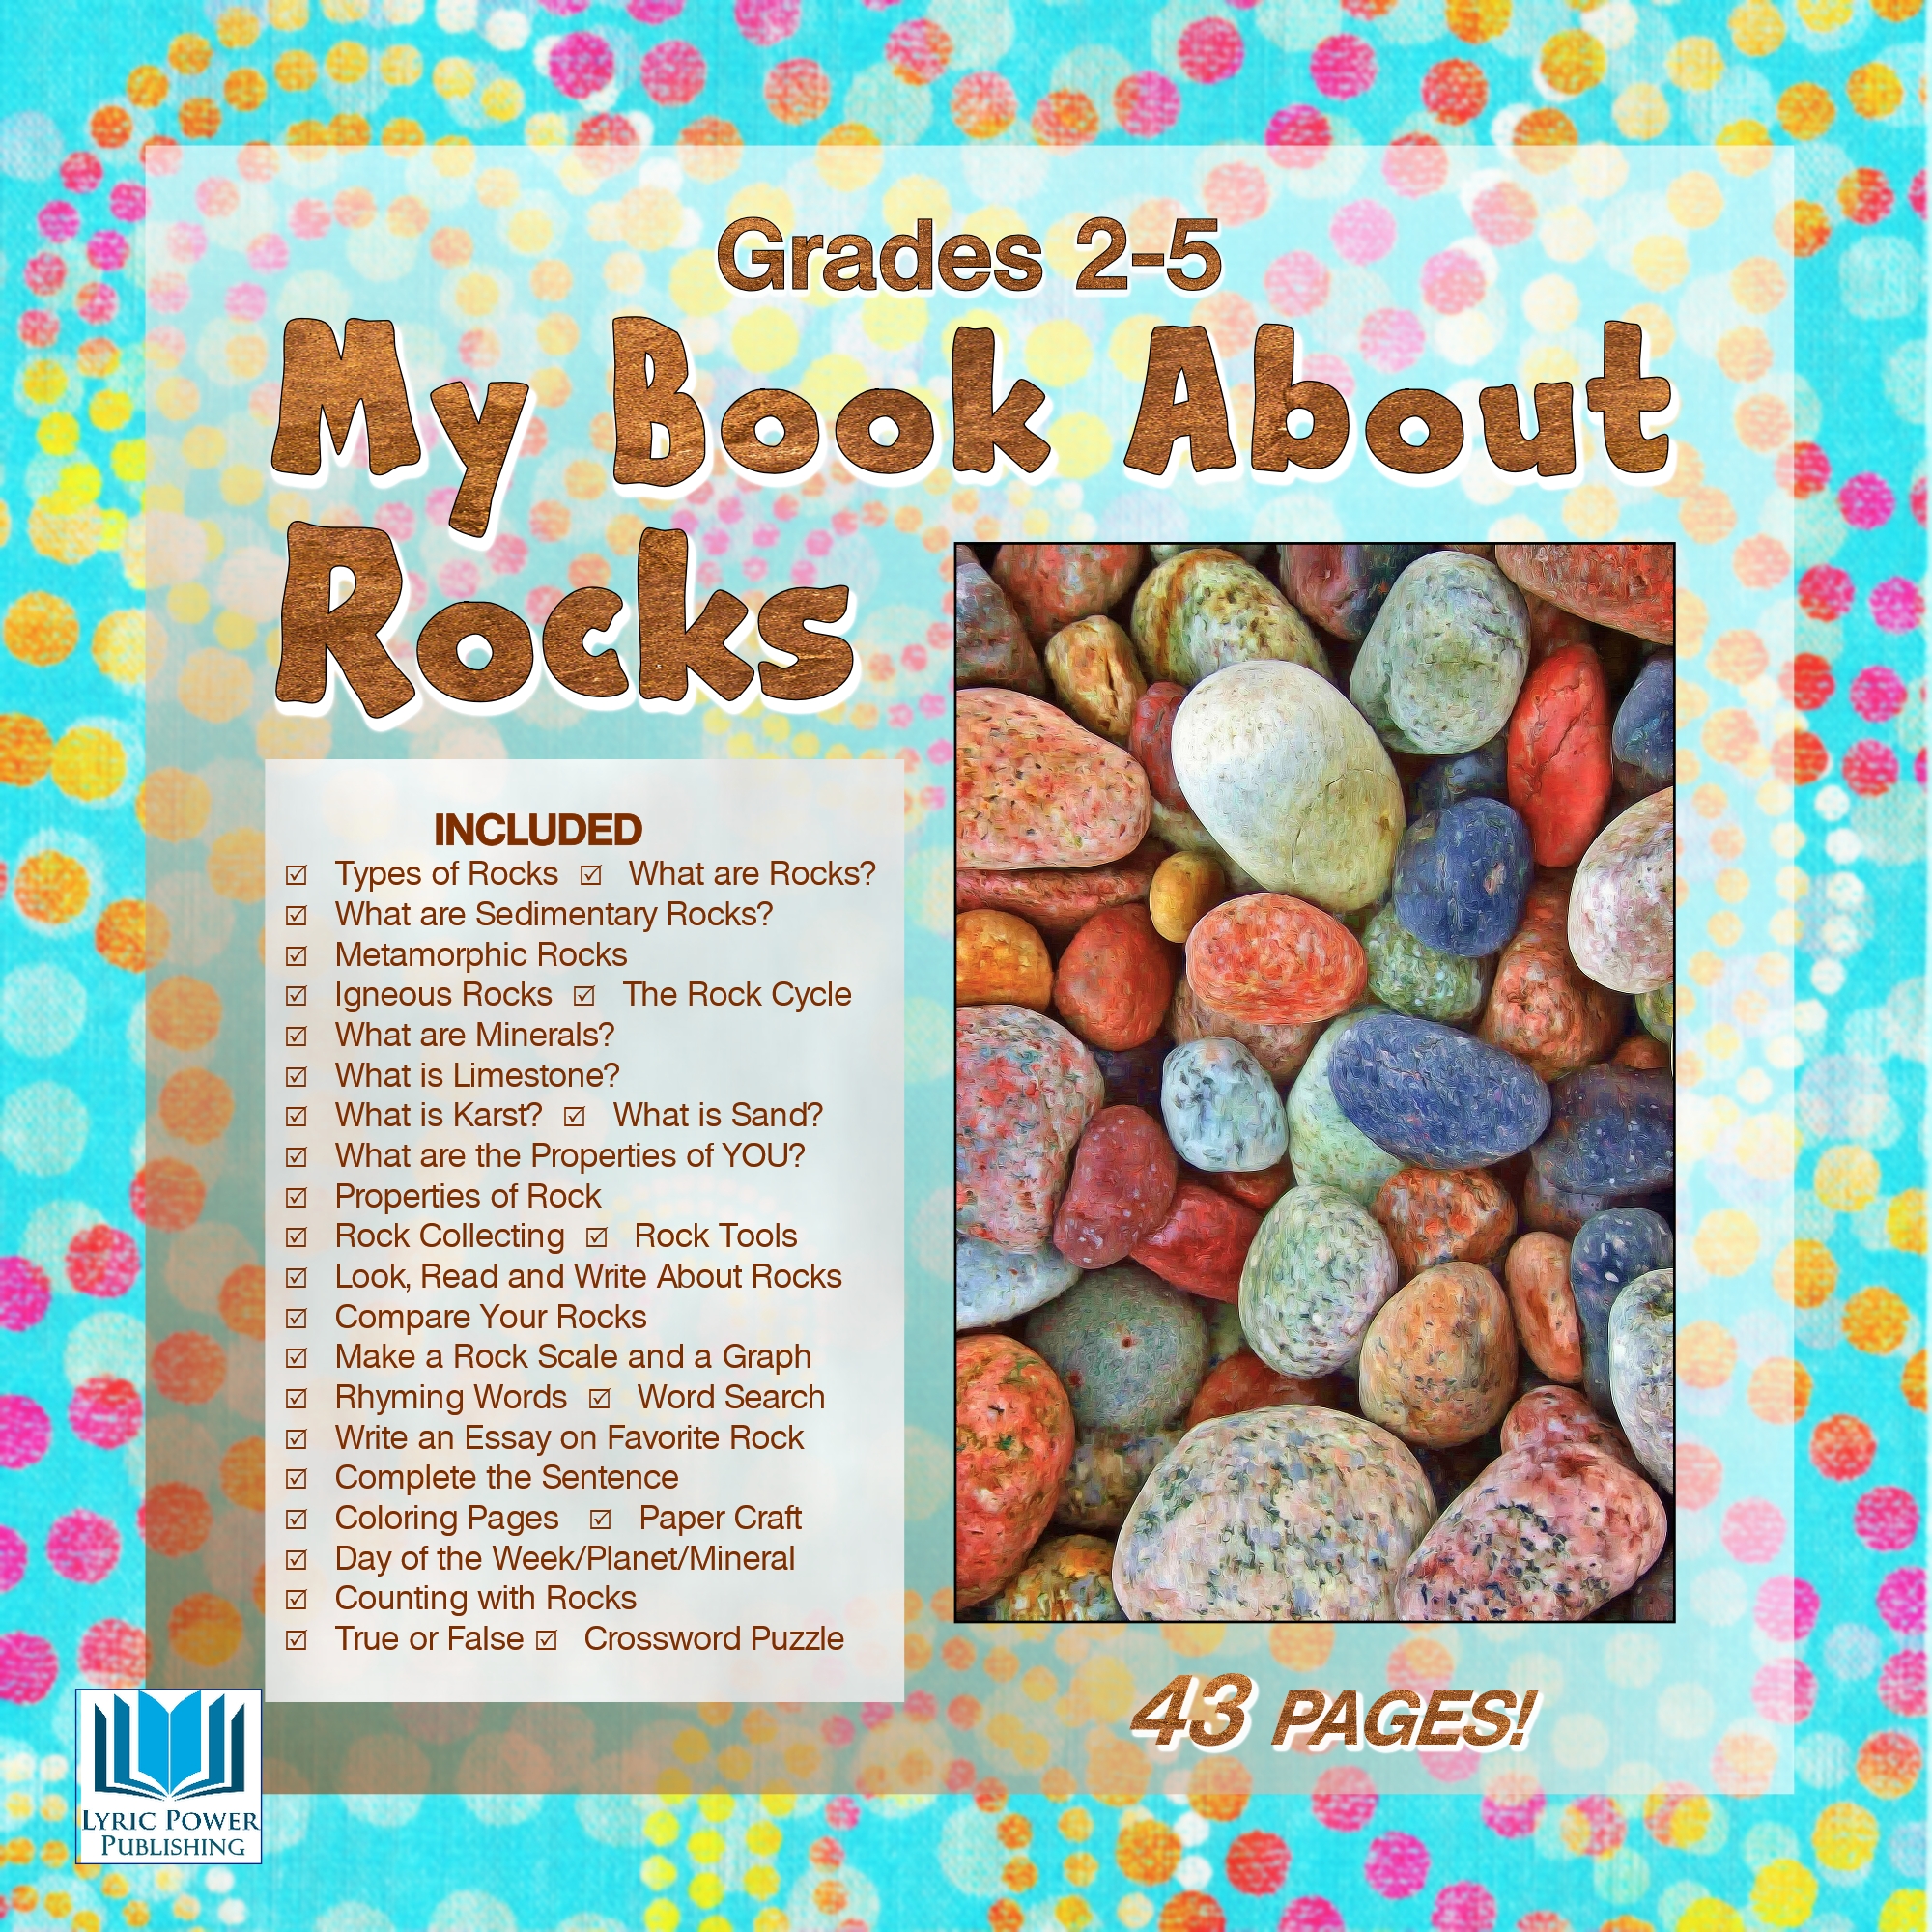 A light blue and white book cover with an image of multi-colored river rocks